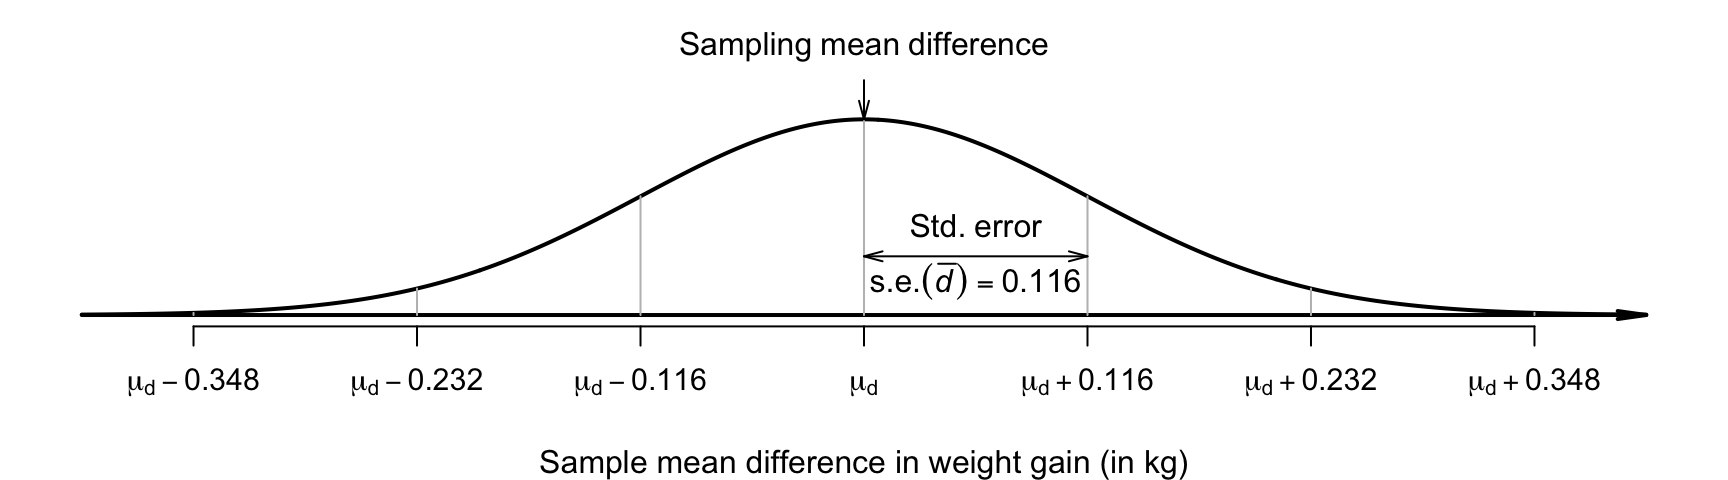 The sampling distribution is a normal distribution; it describes how the sample mean weight gain varies in samples of size $n = 68$